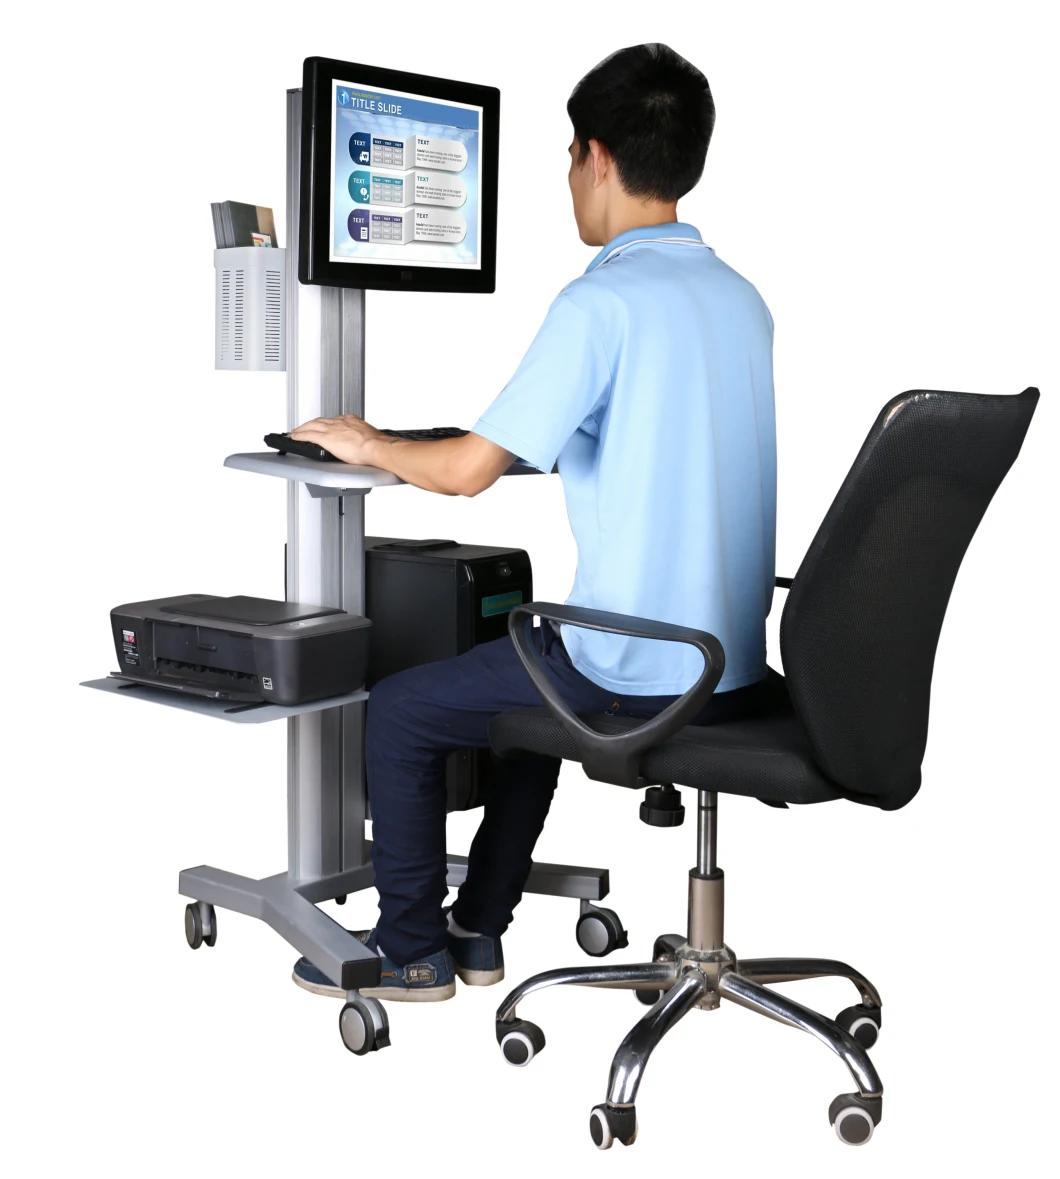 Mobile Computer Workstation 10-24" with Power Rail (PCM 1201)